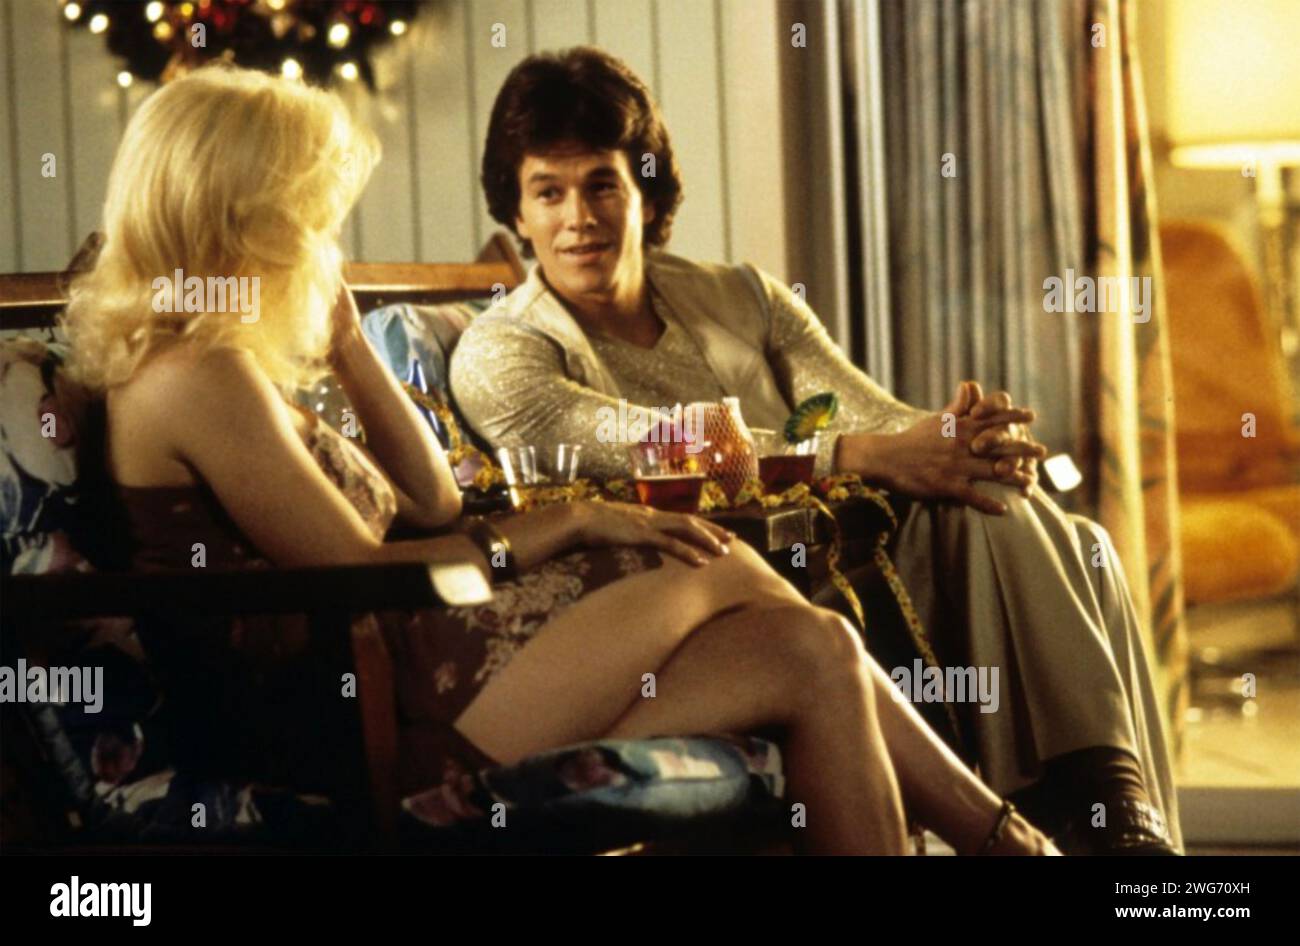 BOOGIE NIGHTS  1997 New Line Cinema film  with Mark Wahlberg as Dirk Diggler and Julianne Moore as Amber Waves Stock Photo